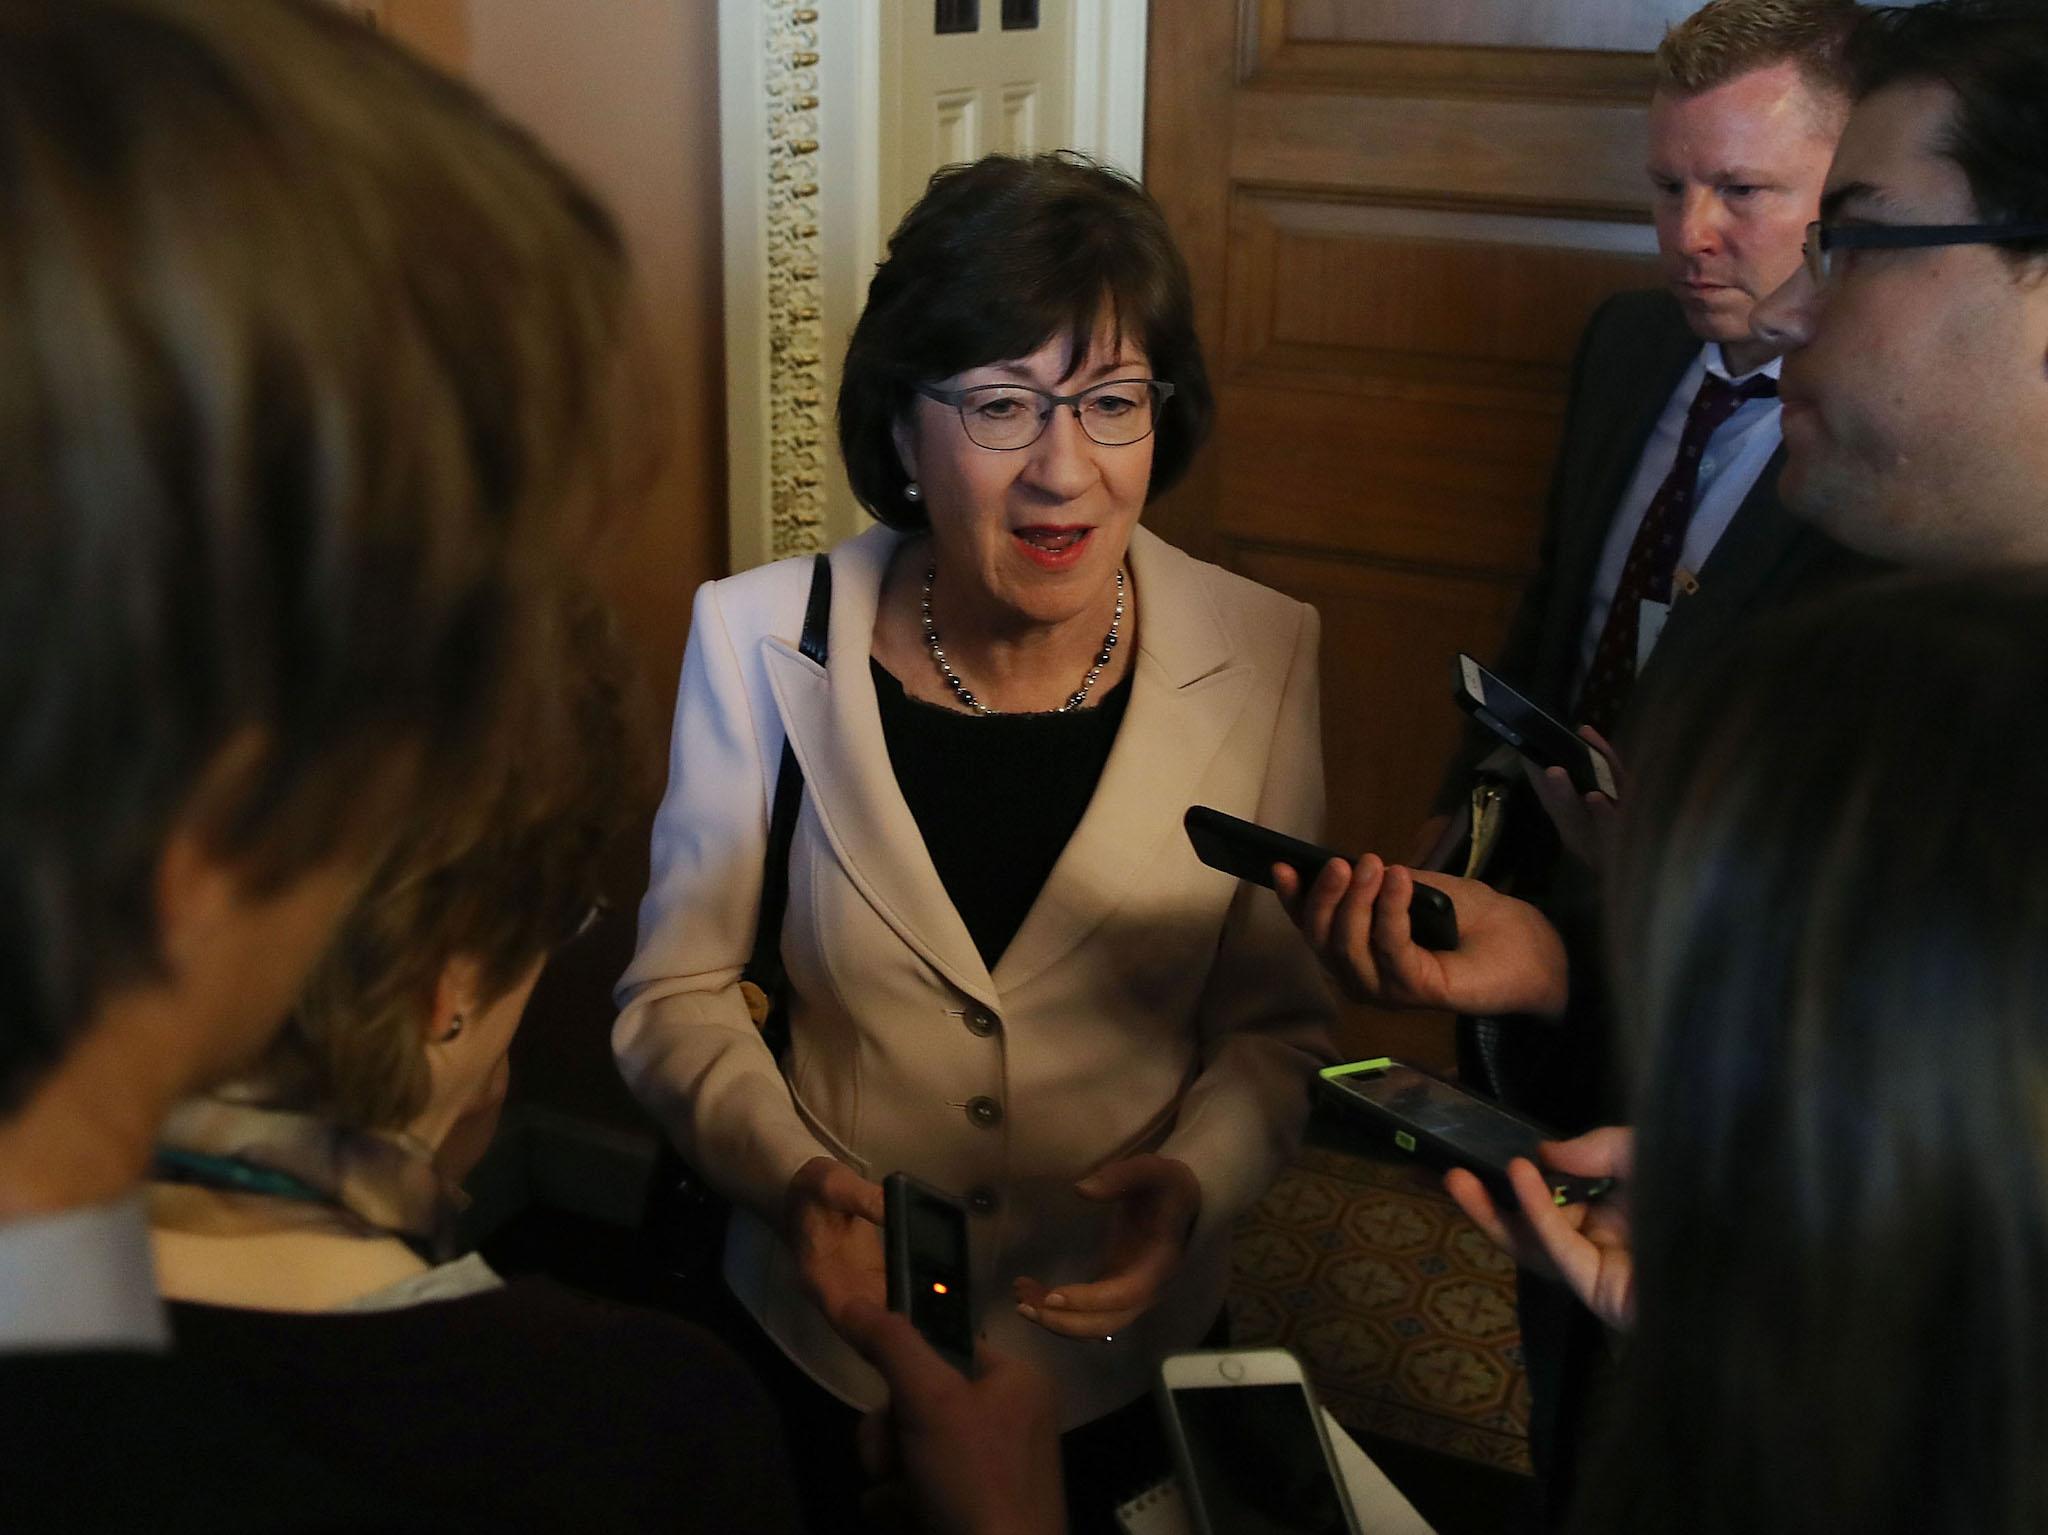 Susan Collins has said up to 10 Republicans have concerns over the healthcare bill